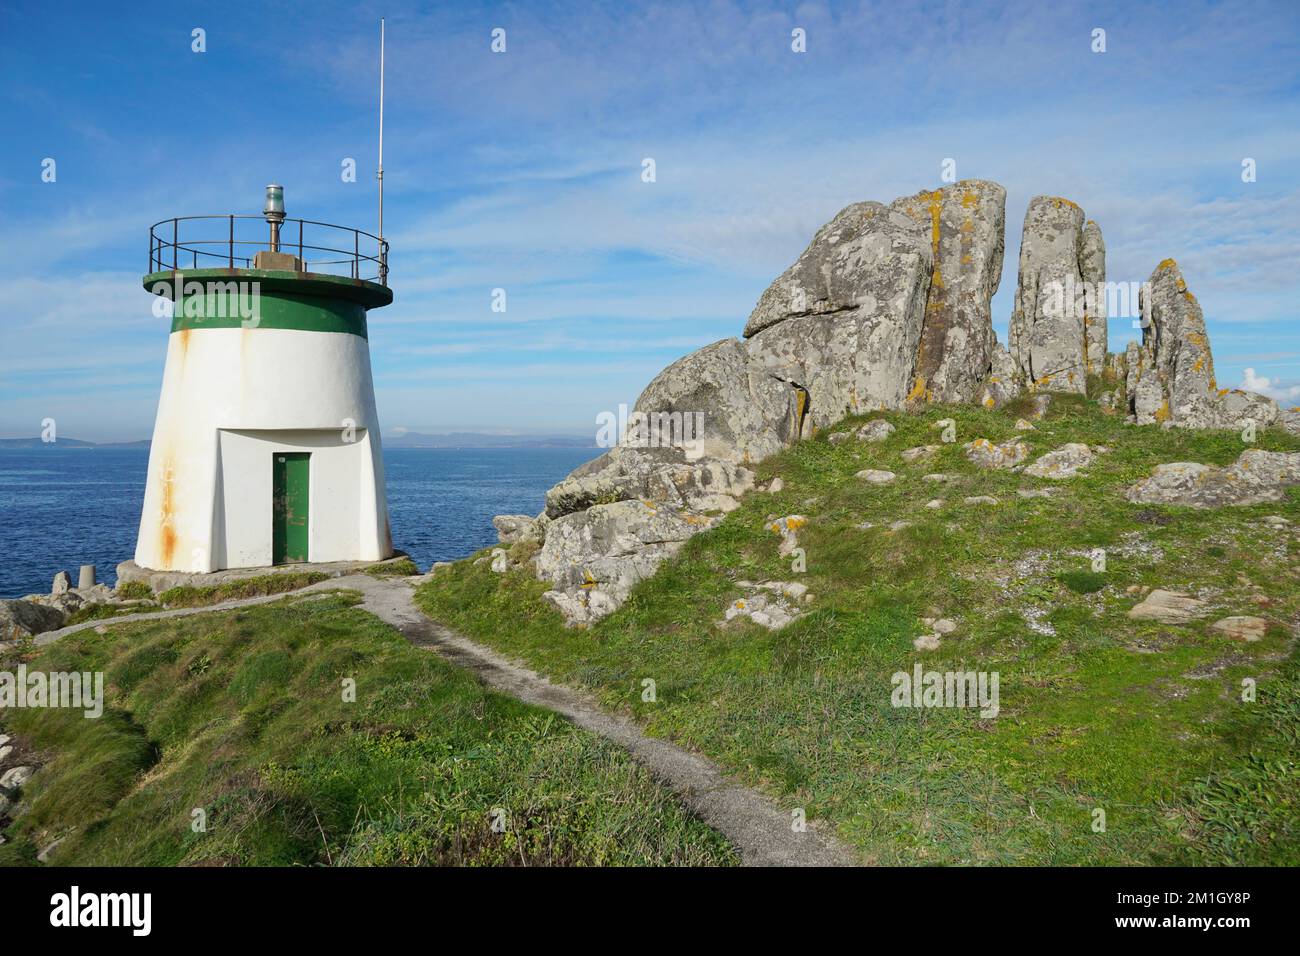 Lighthouse with rock formation on the coast of Galicia in Spain, Pontevedra province, Cangas, Rias Baixas Stock Photo